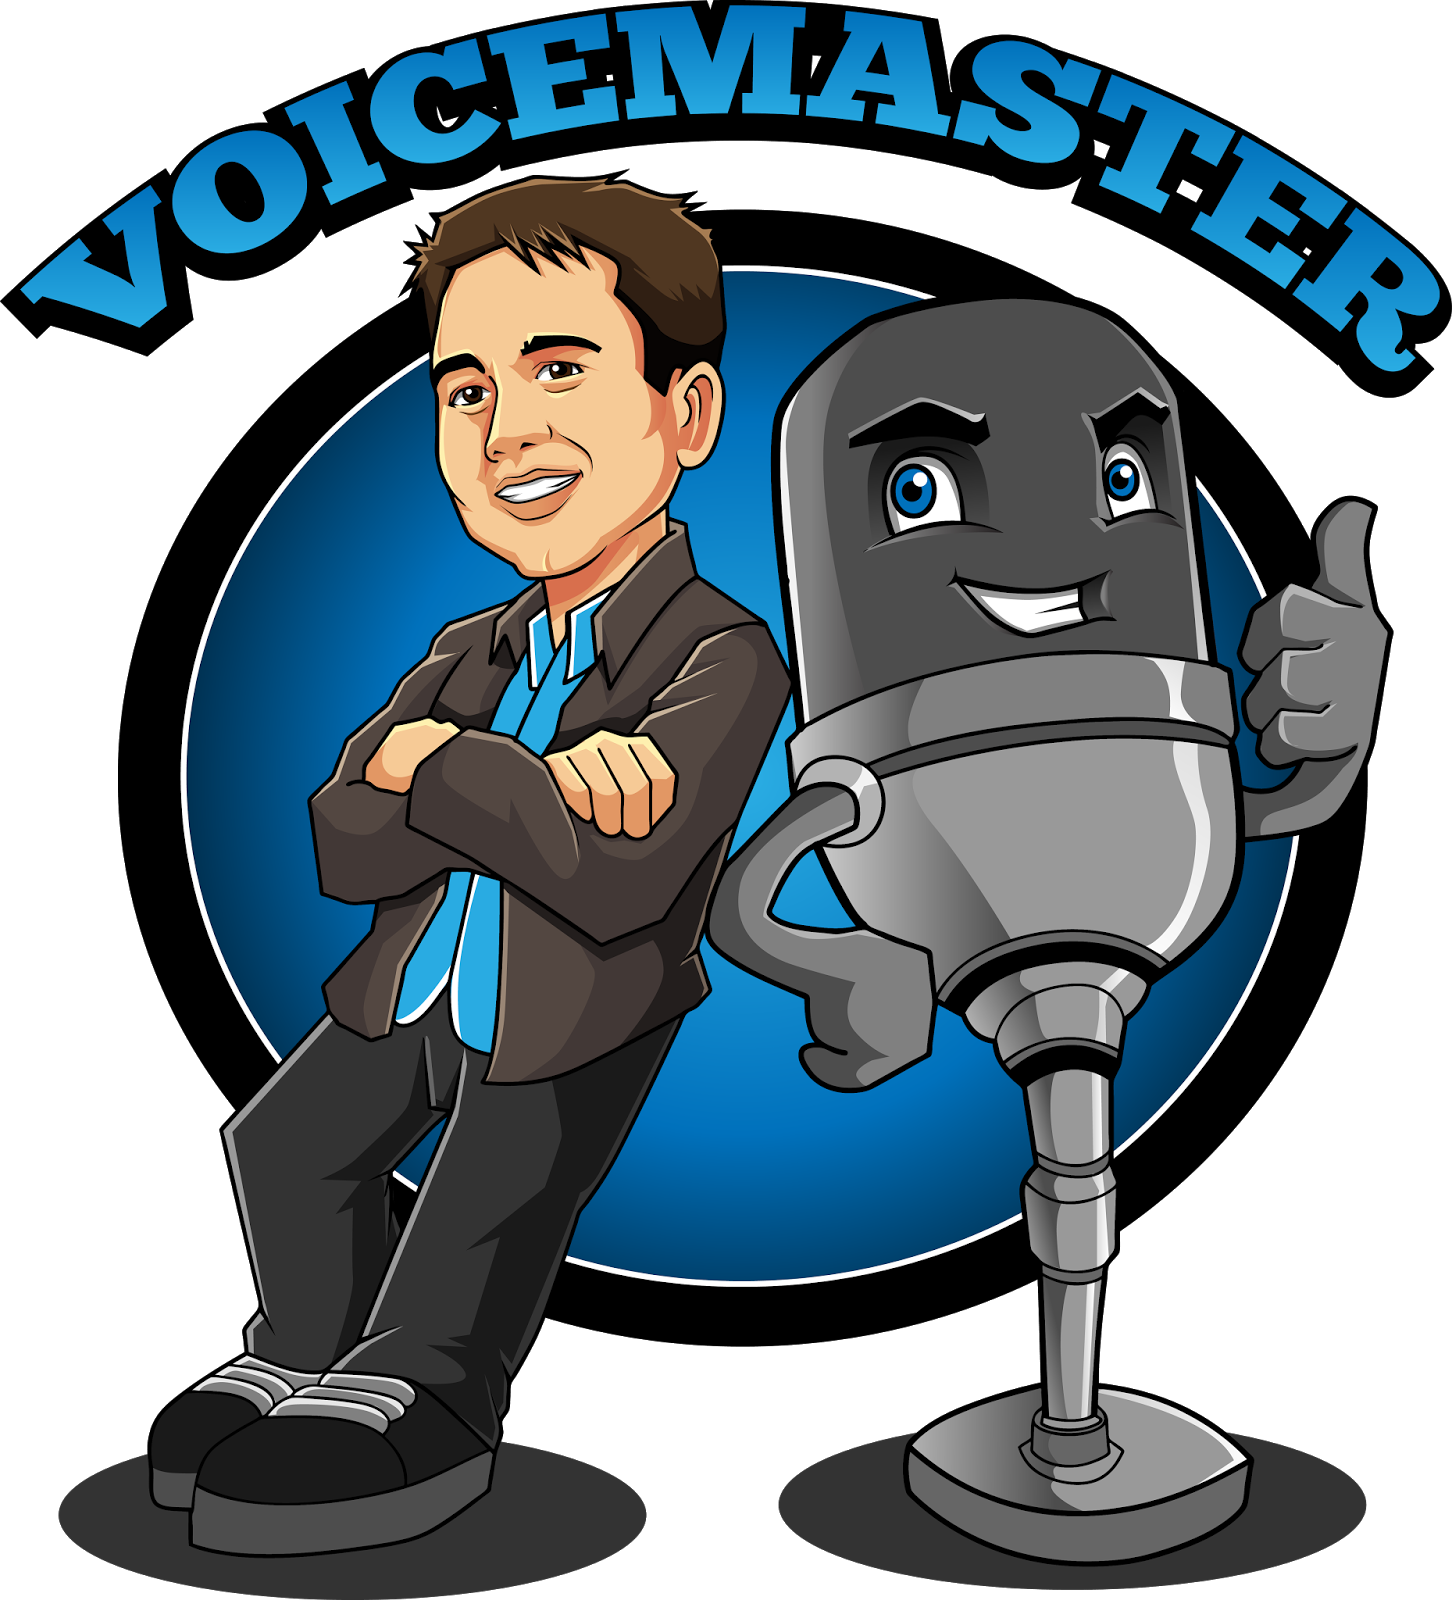 The VoiceMaster